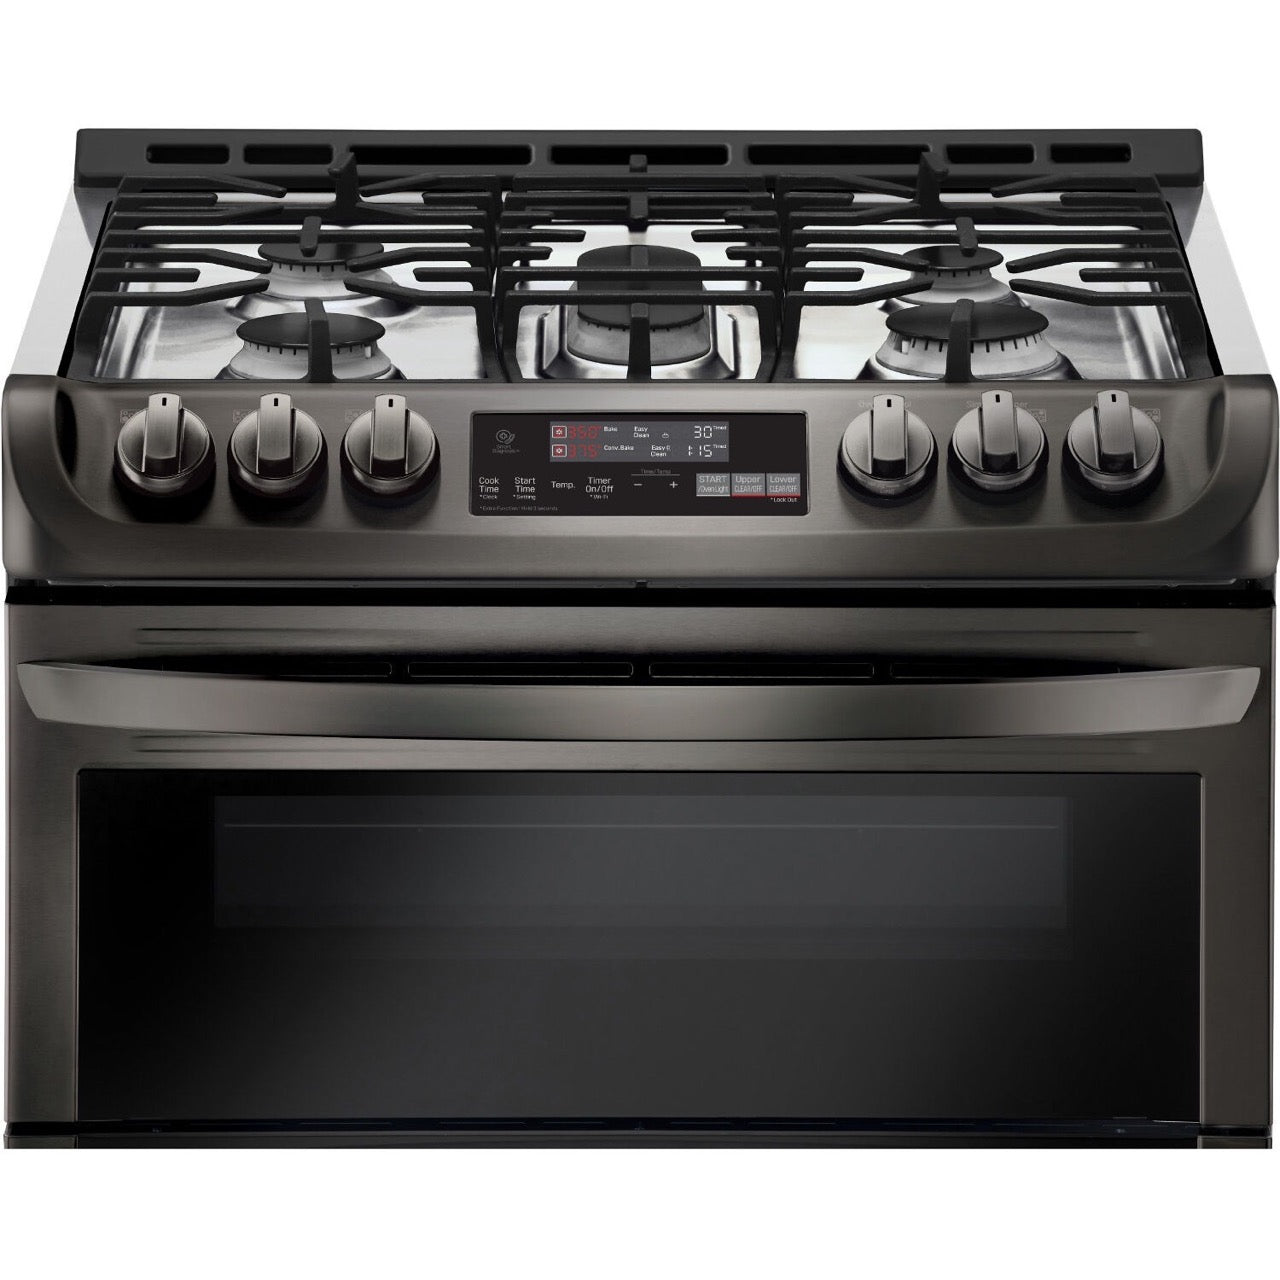 LG Electronics 6.9-Cu. Ft. Gas Range with Double Oven and ProBake Convection, Black Stainless Steel (LTG4715BD)